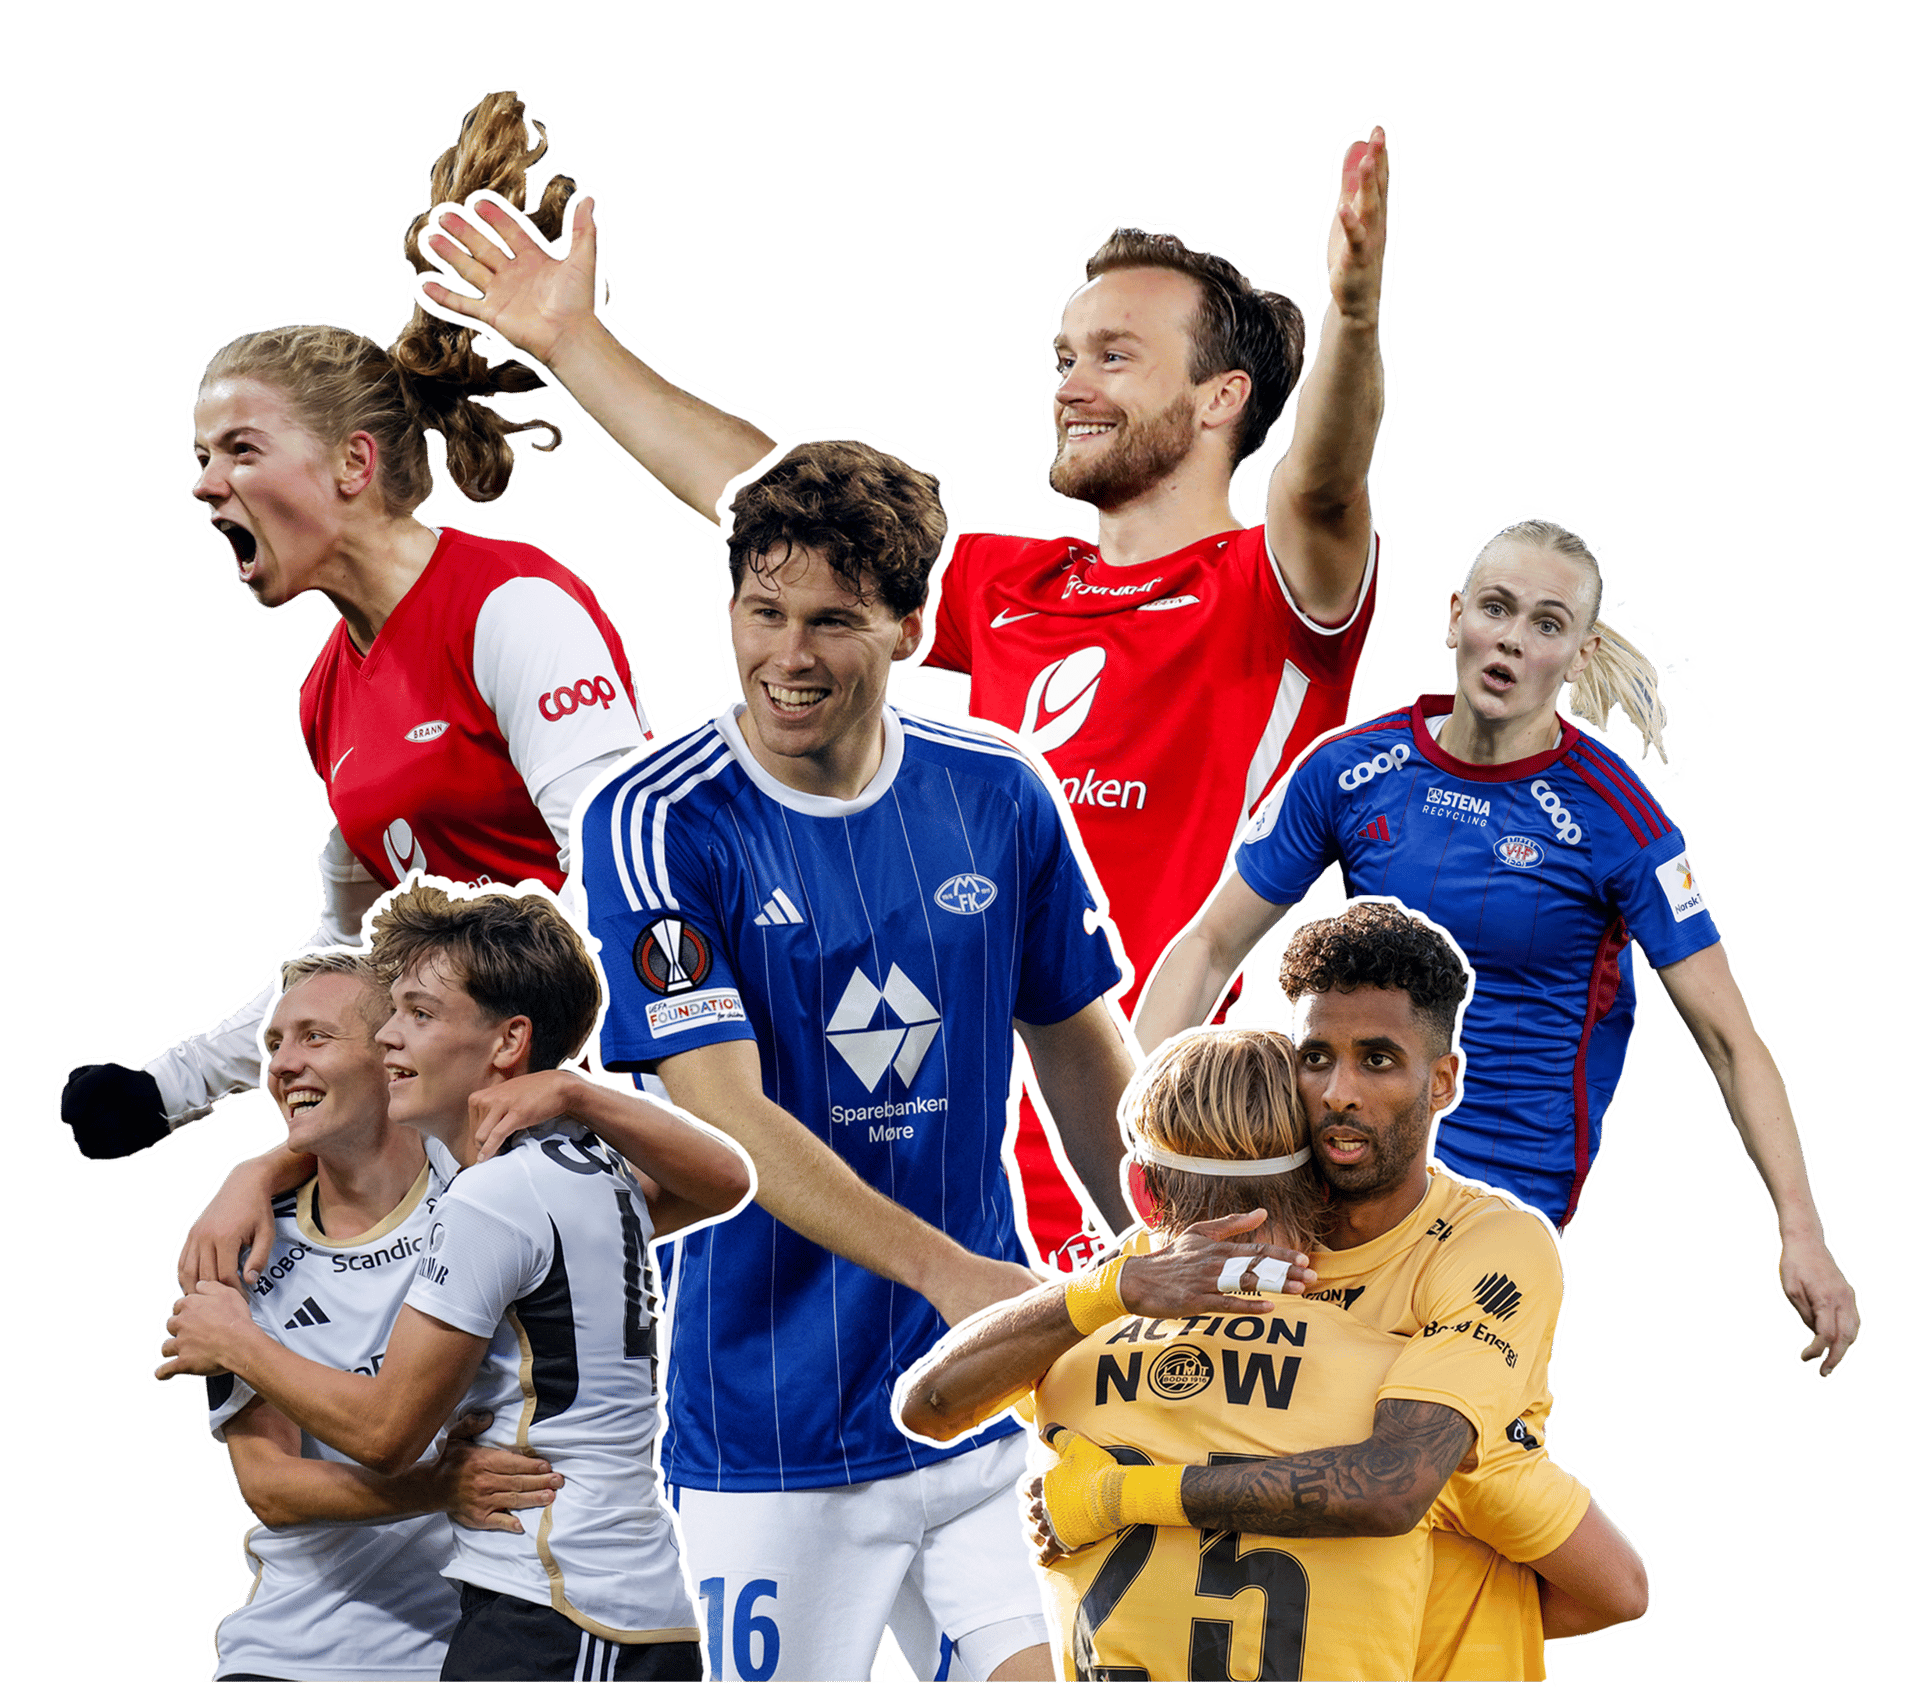 Sports uniform, Smile, Jersey, Shorts, Sleeve, Gesture, Player, Happy, T-shirt